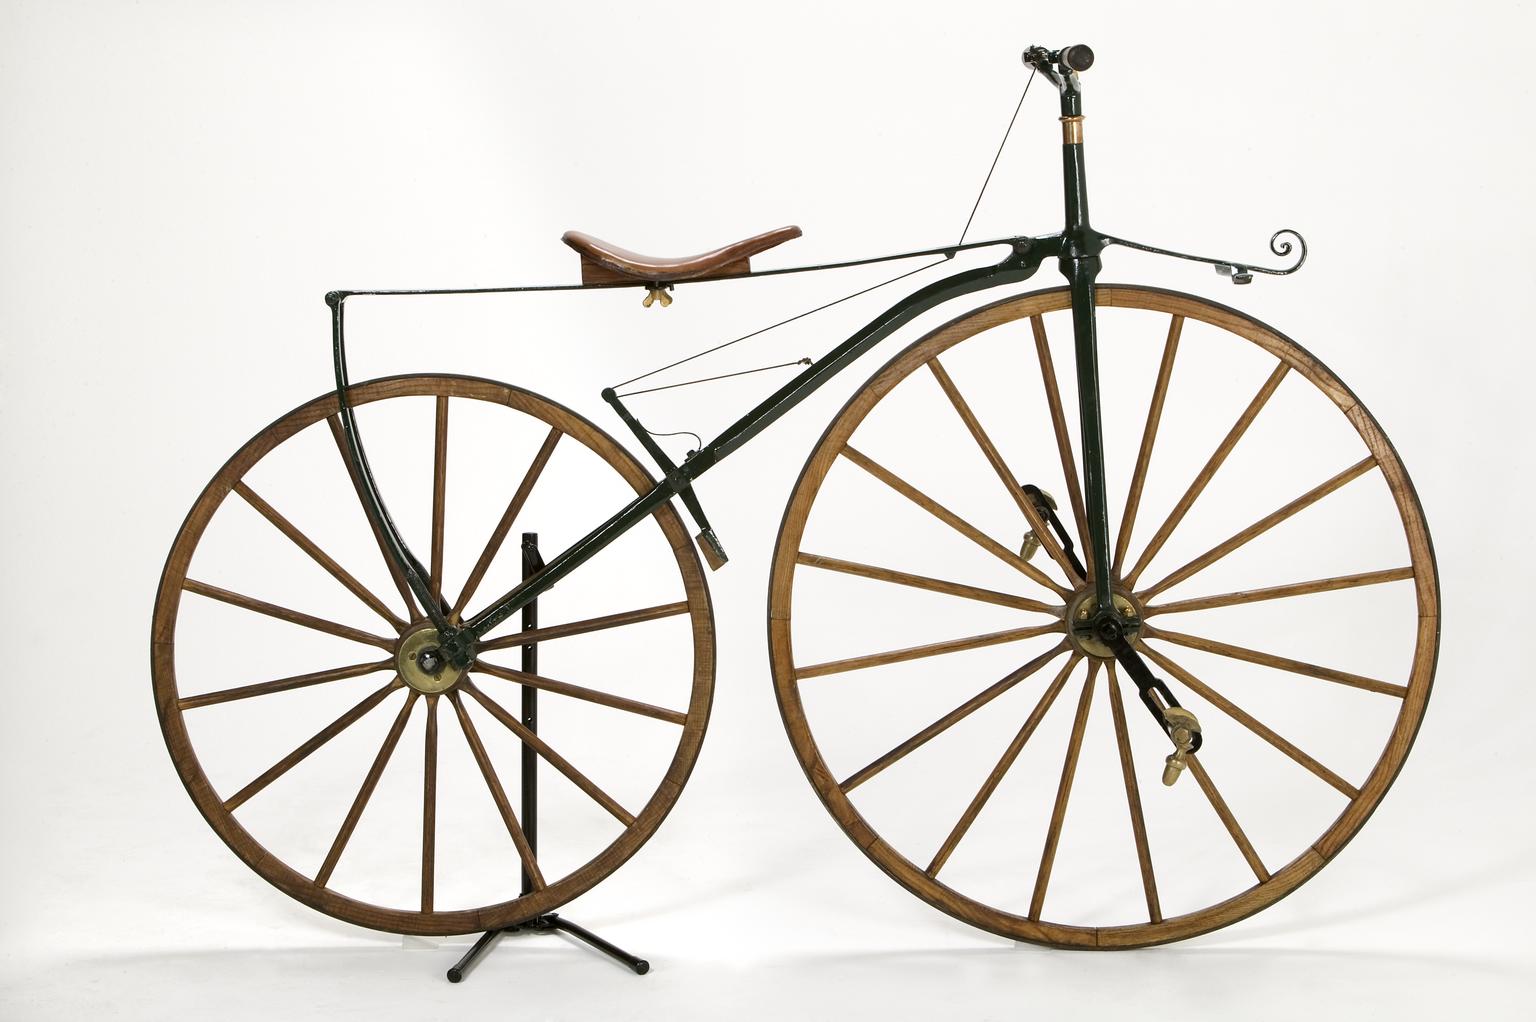 An early bicycle